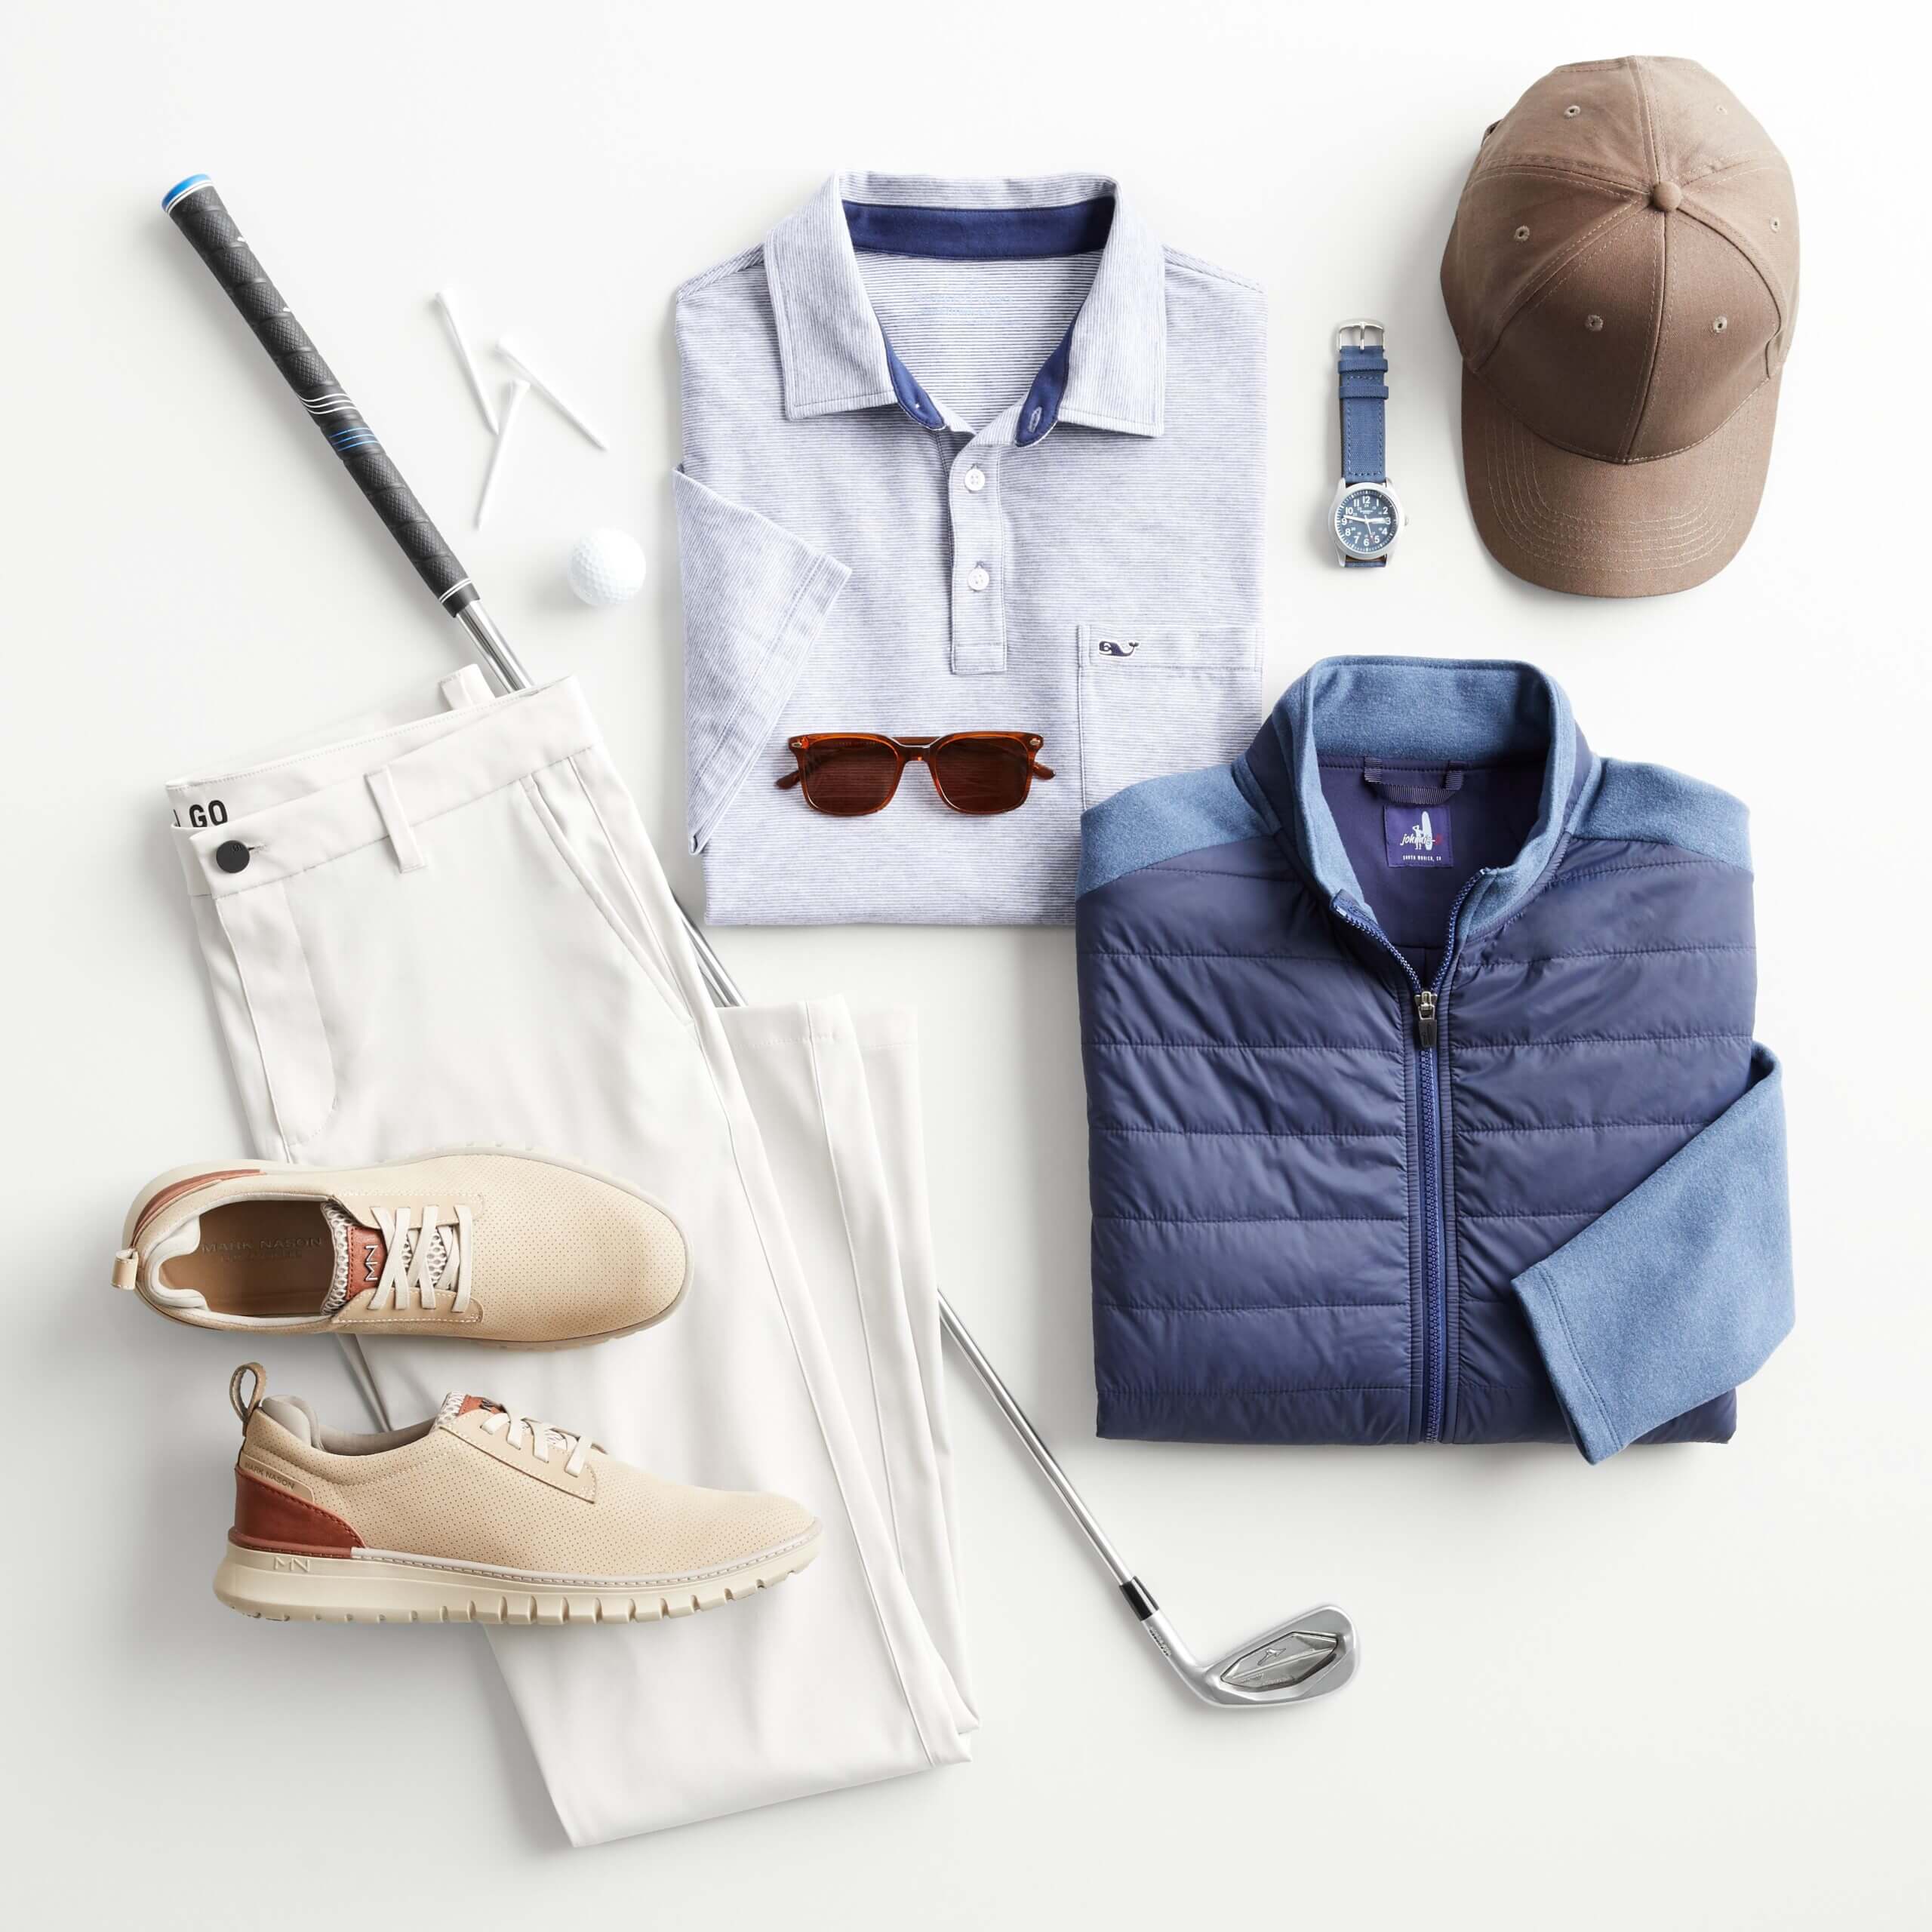 Golf Attire: Everything You Need To Know